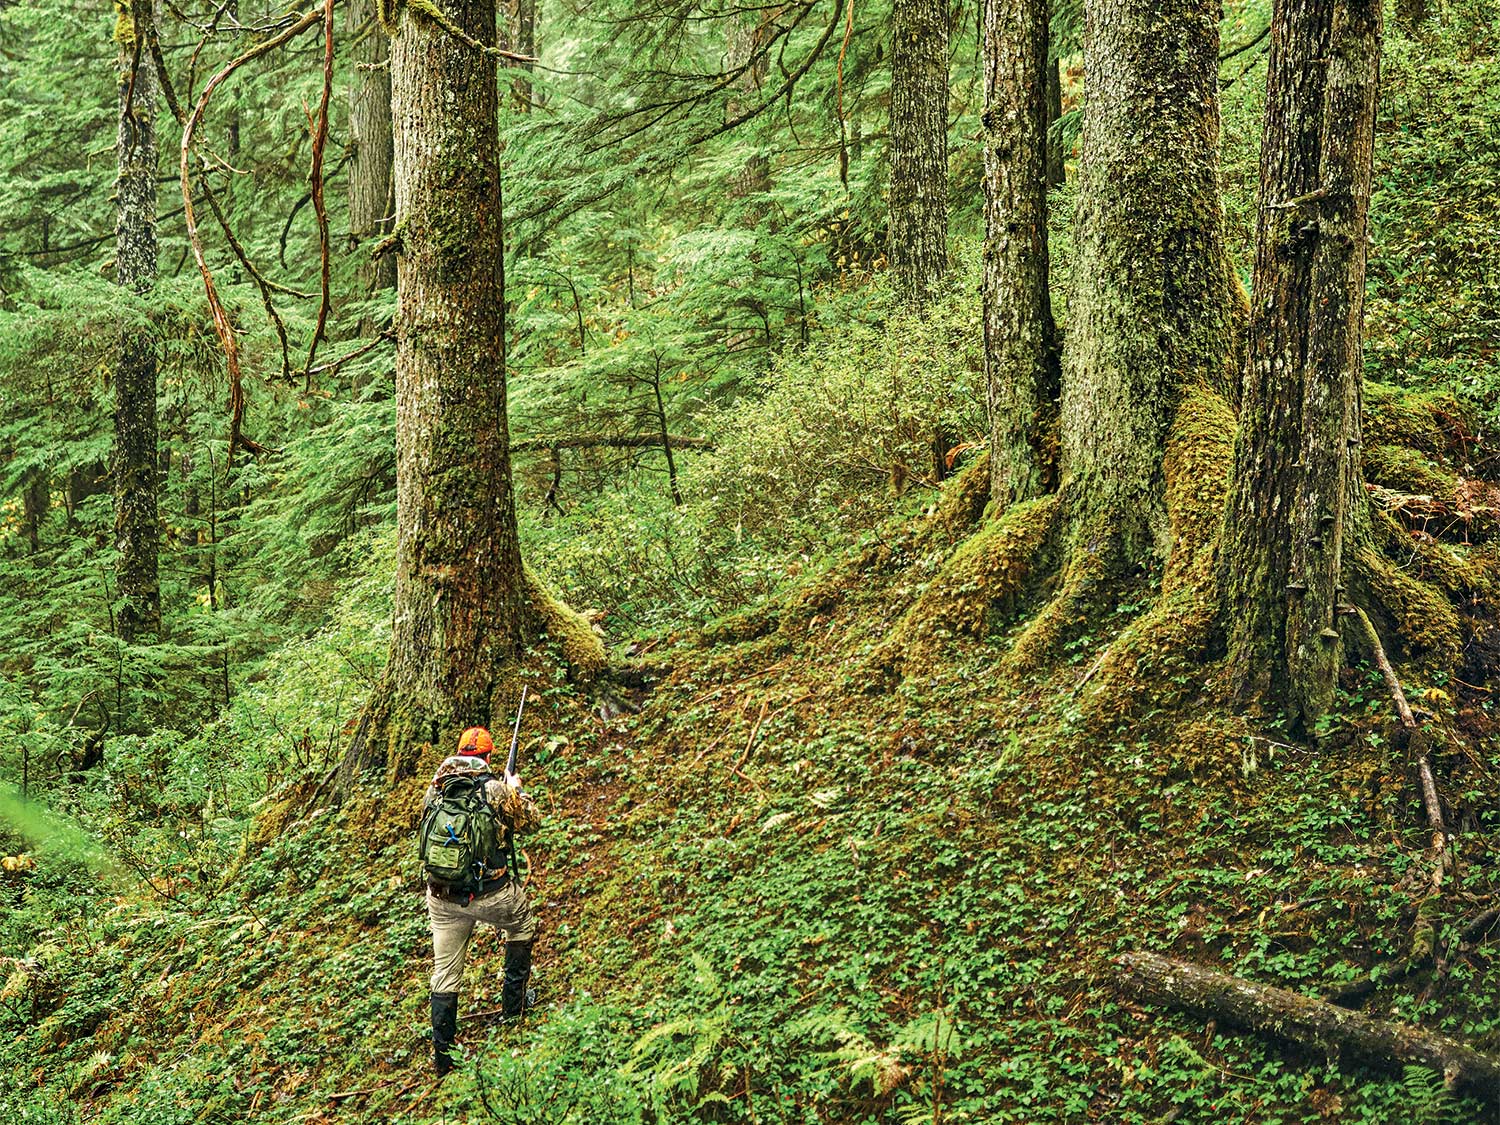 A person hiking through the Tongass National Forest.